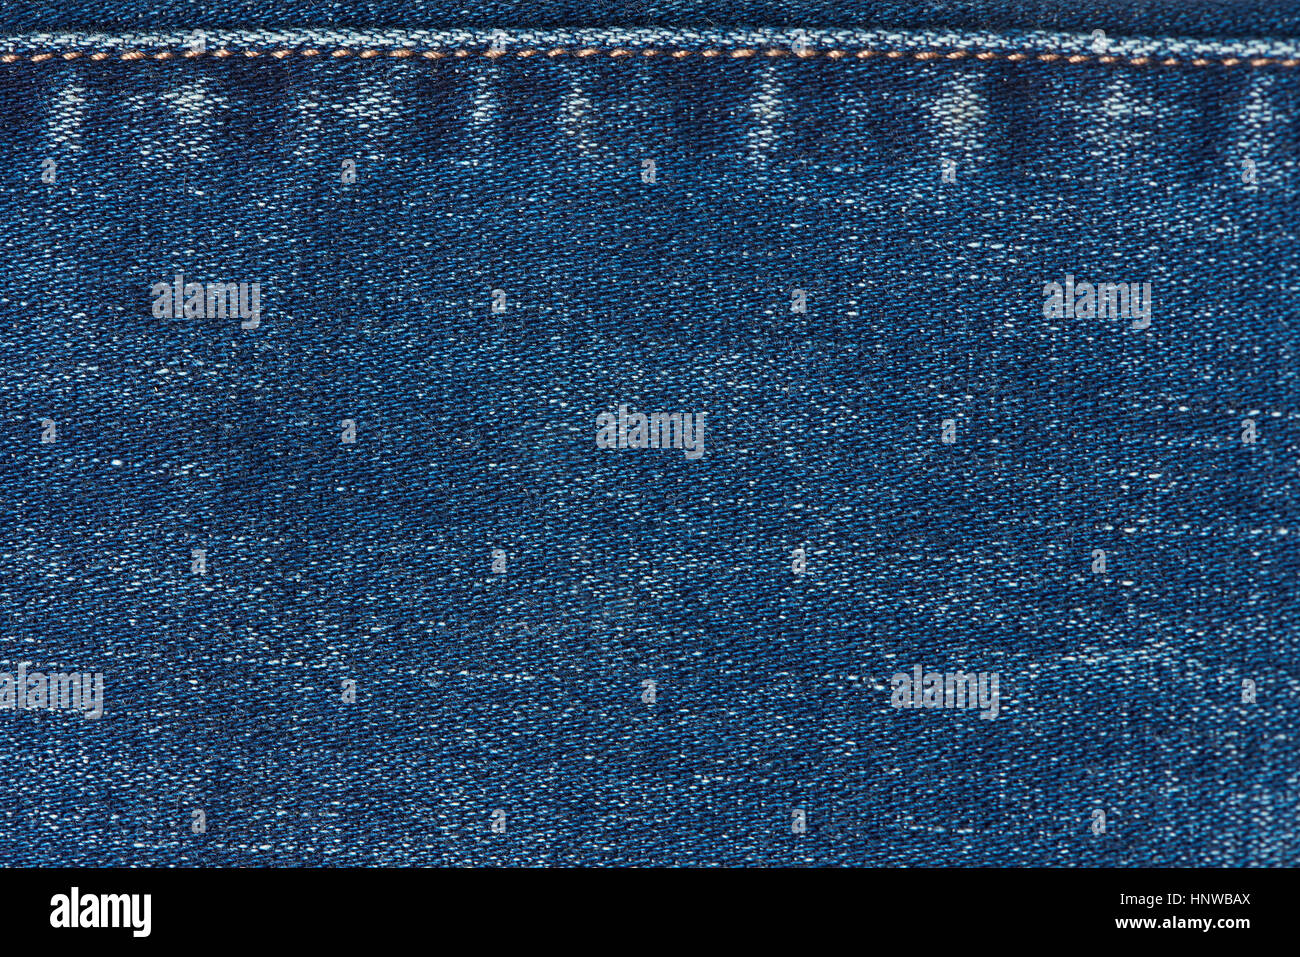 Fabric jeans textile  with stitches. Texture of dark blue jeans Stock Photo